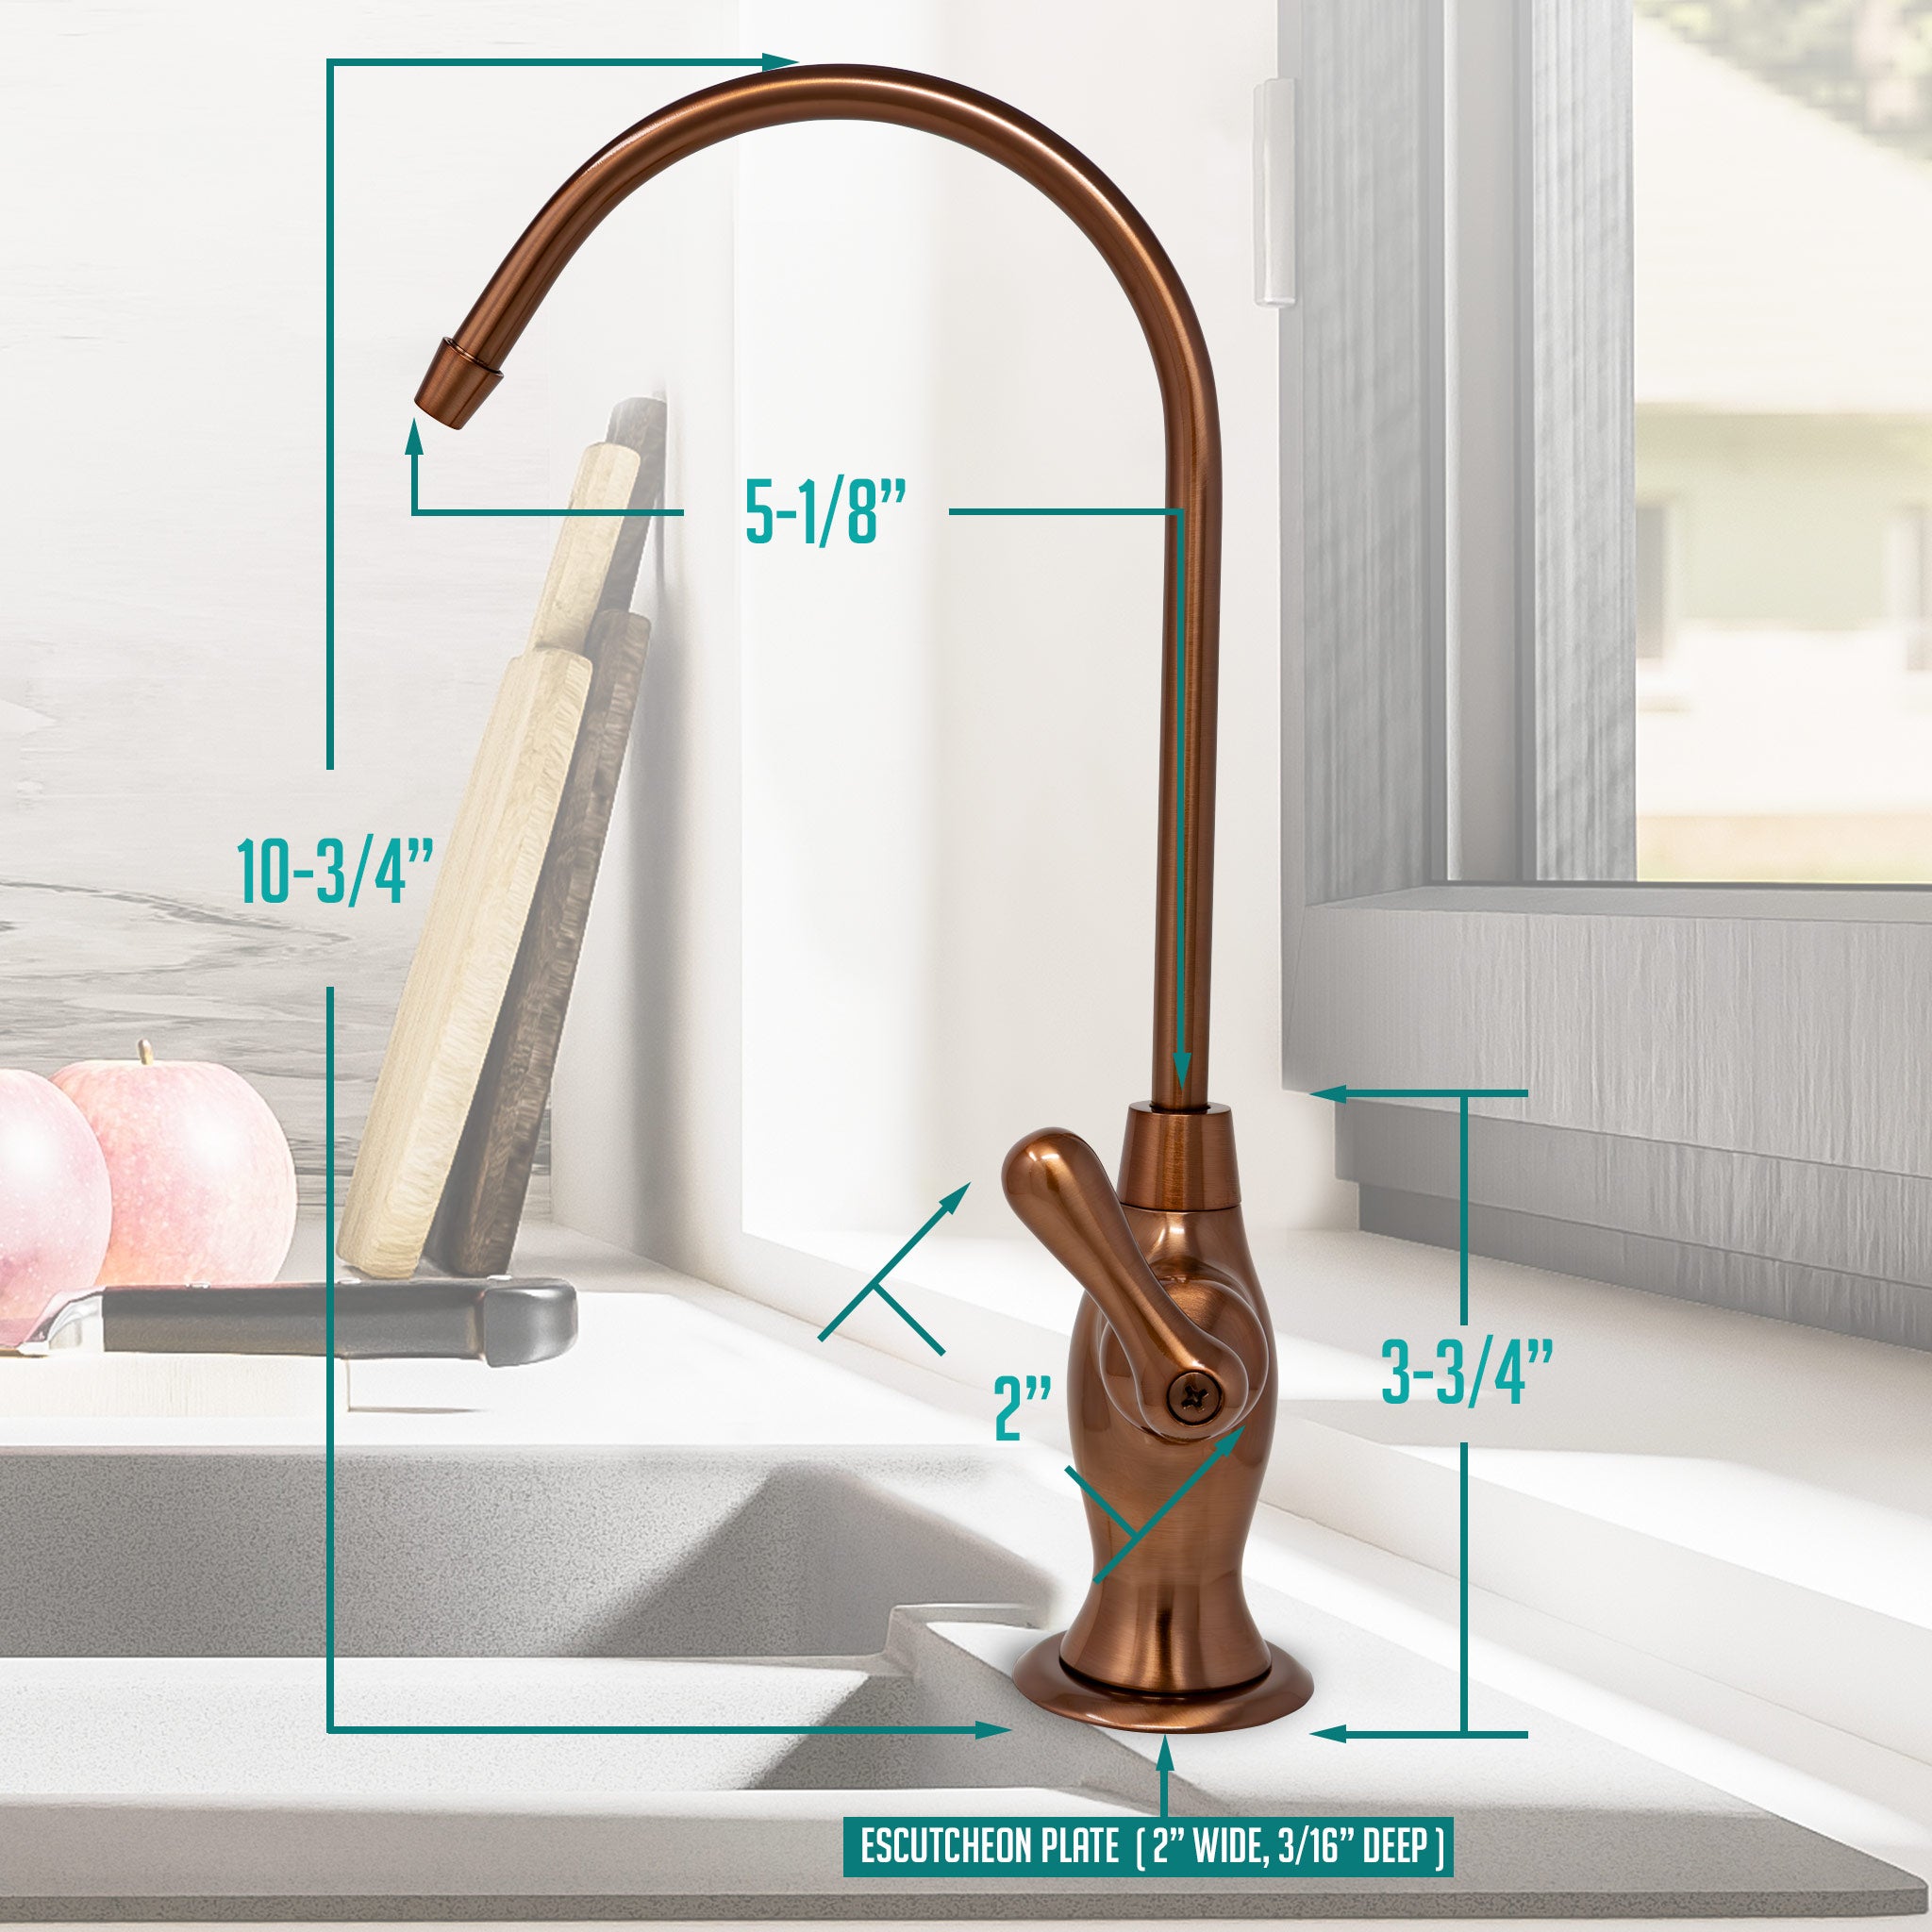 Water Filtration Faucet Vase Style Rose Gold Reverse Osmosis Non Air Gap. Certified by NSF.